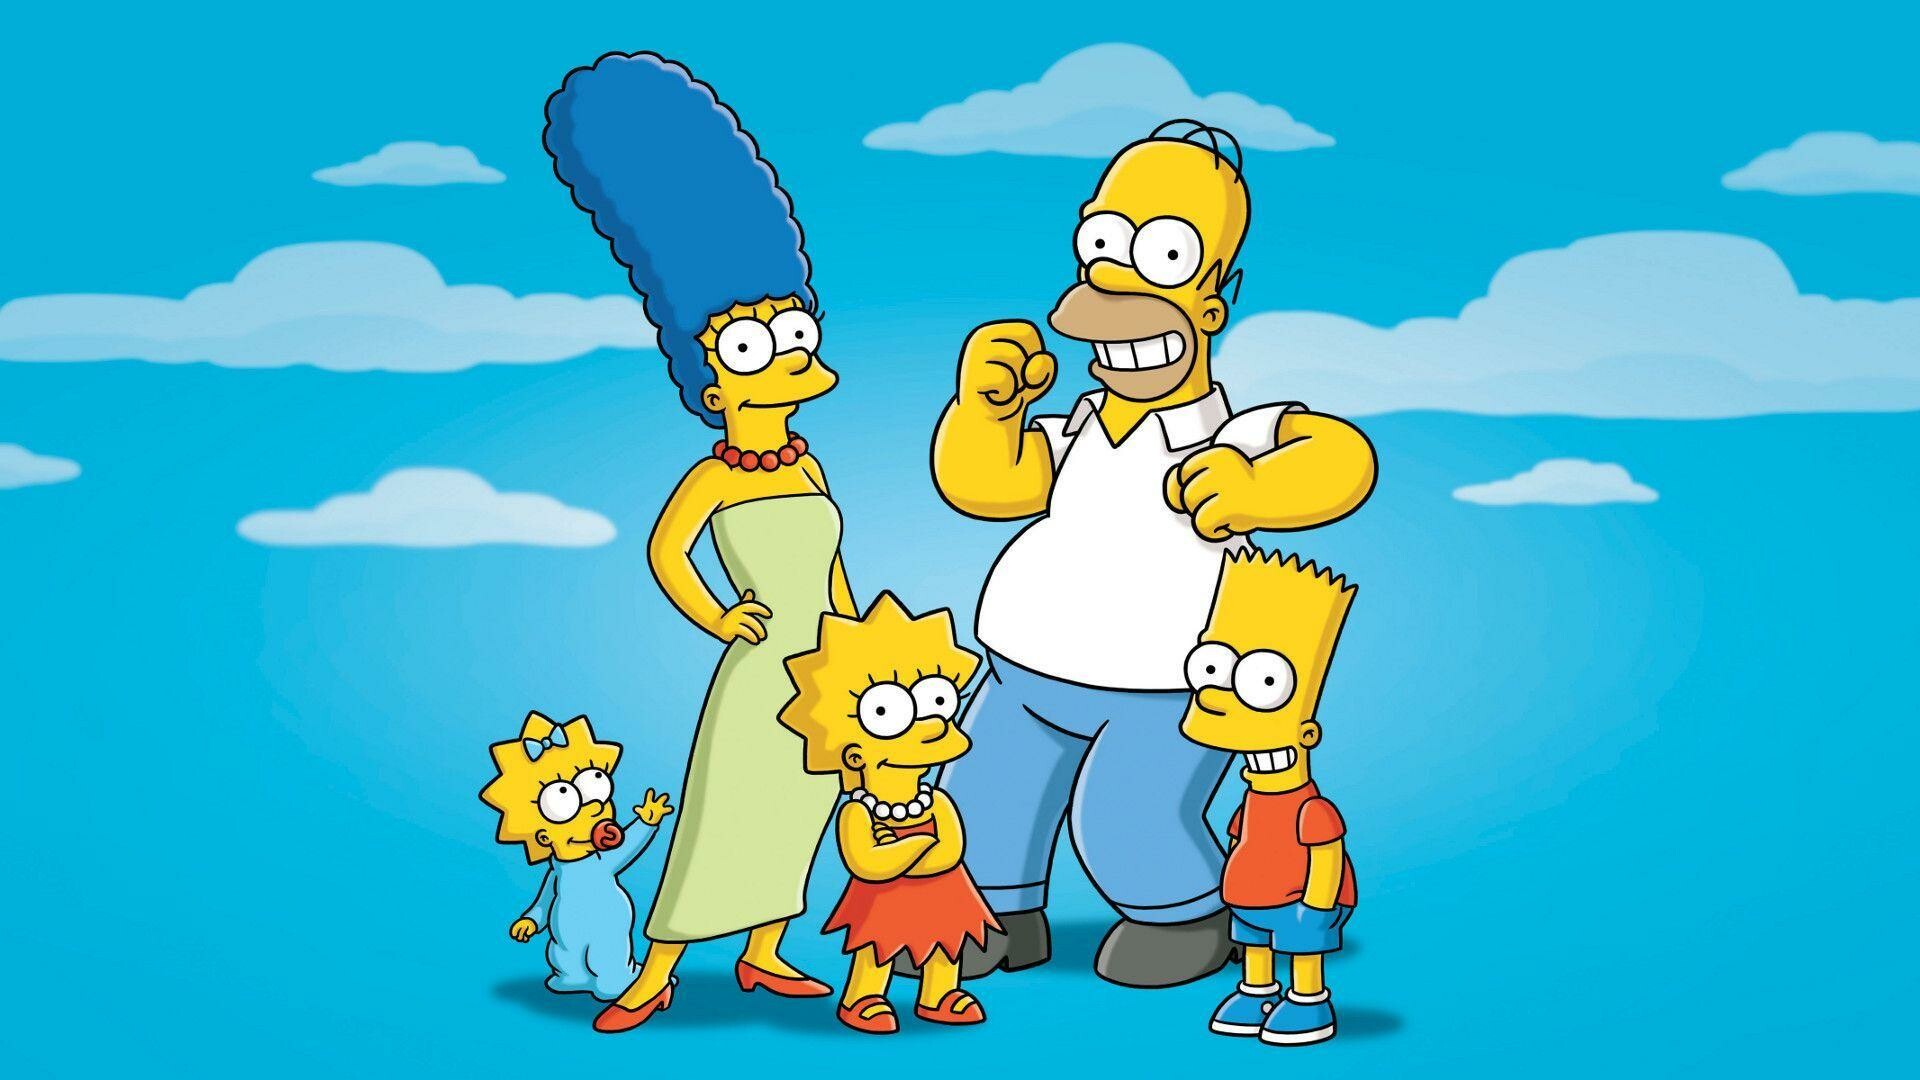 The Simpsons: Its thirty-third season premiered on September 26, 2021. 1920x1080 Full HD Background.